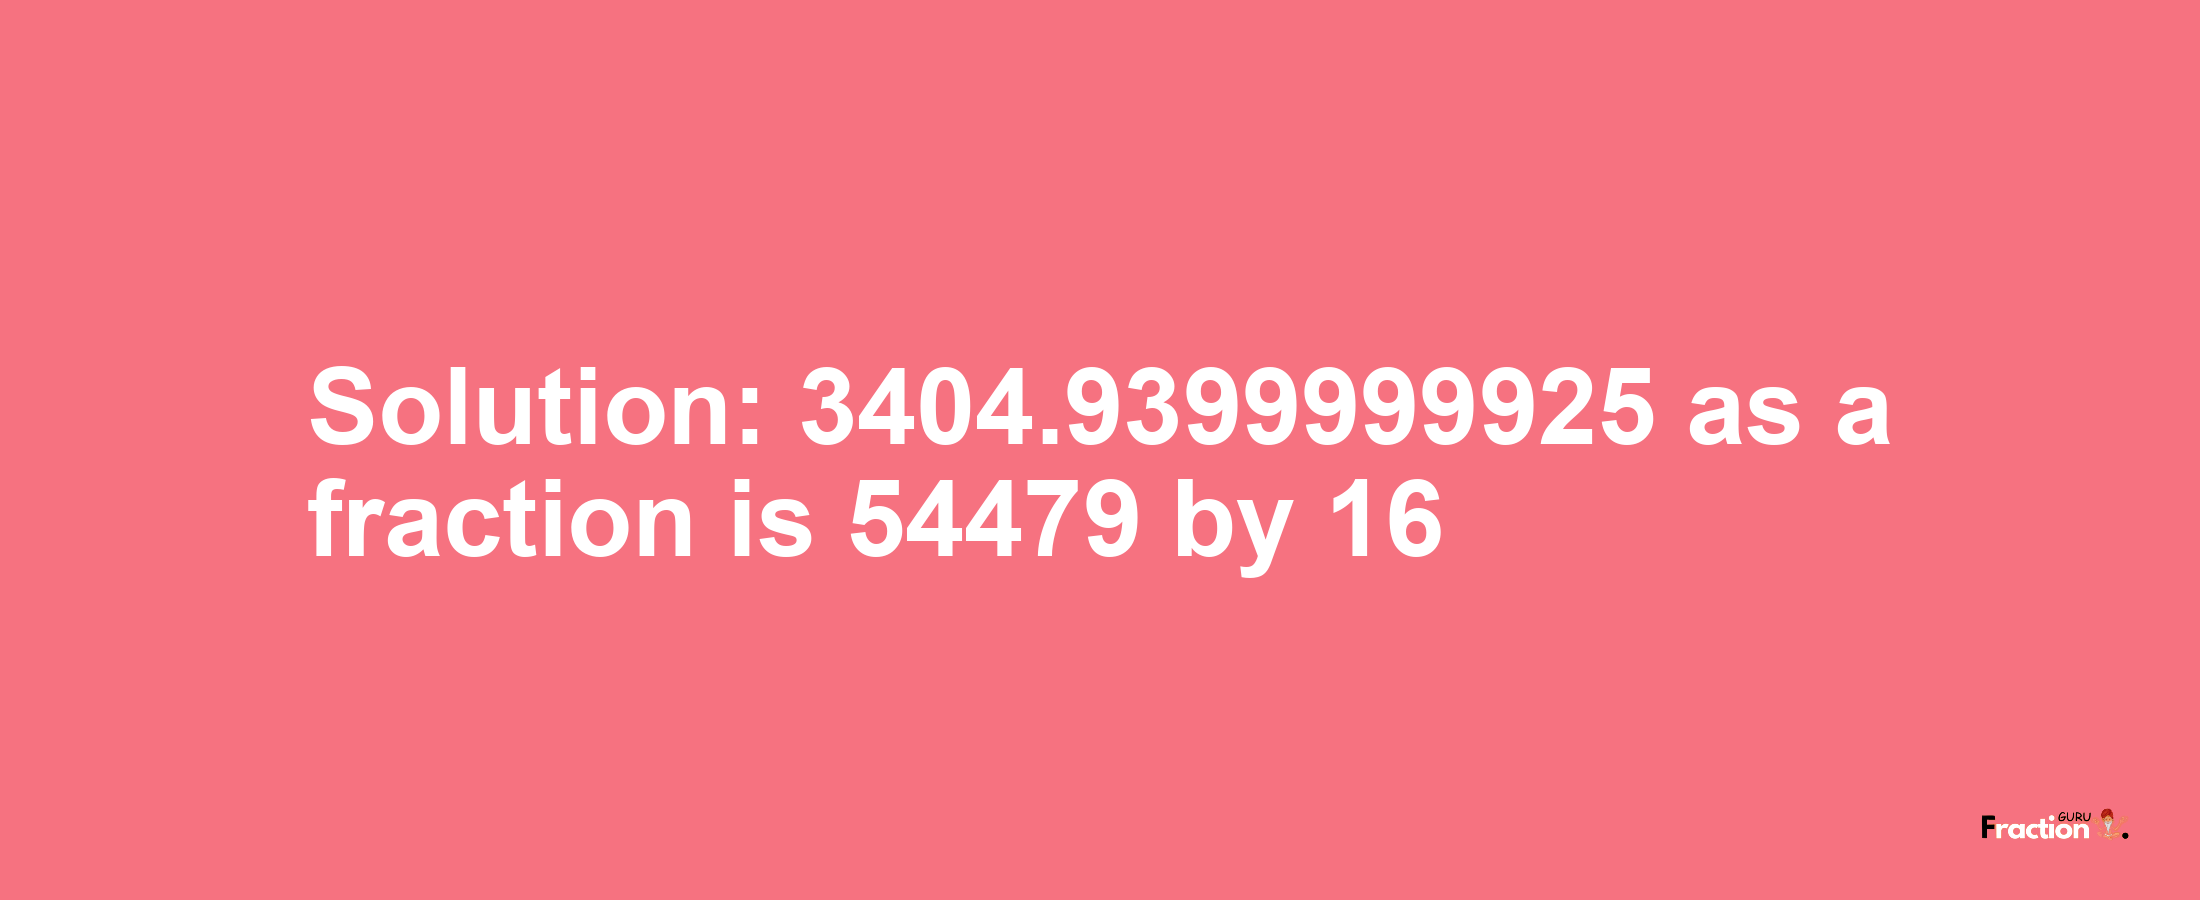 Solution:3404.9399999925 as a fraction is 54479/16